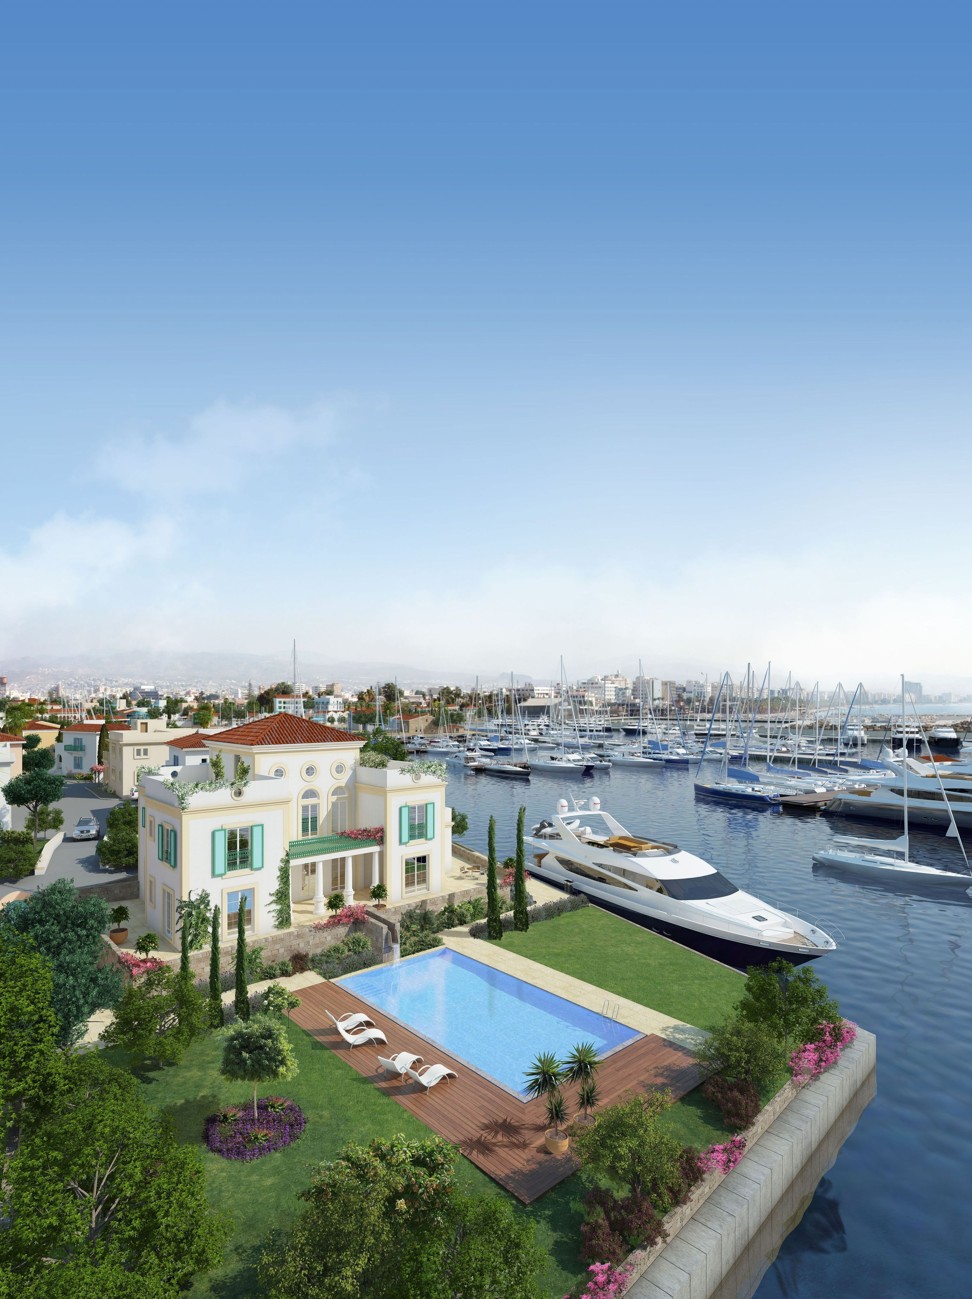 Luxury villas at Limassol Marina, in the city of Limassol, Cyprus – a nation that has no language test for citizenship applicants.